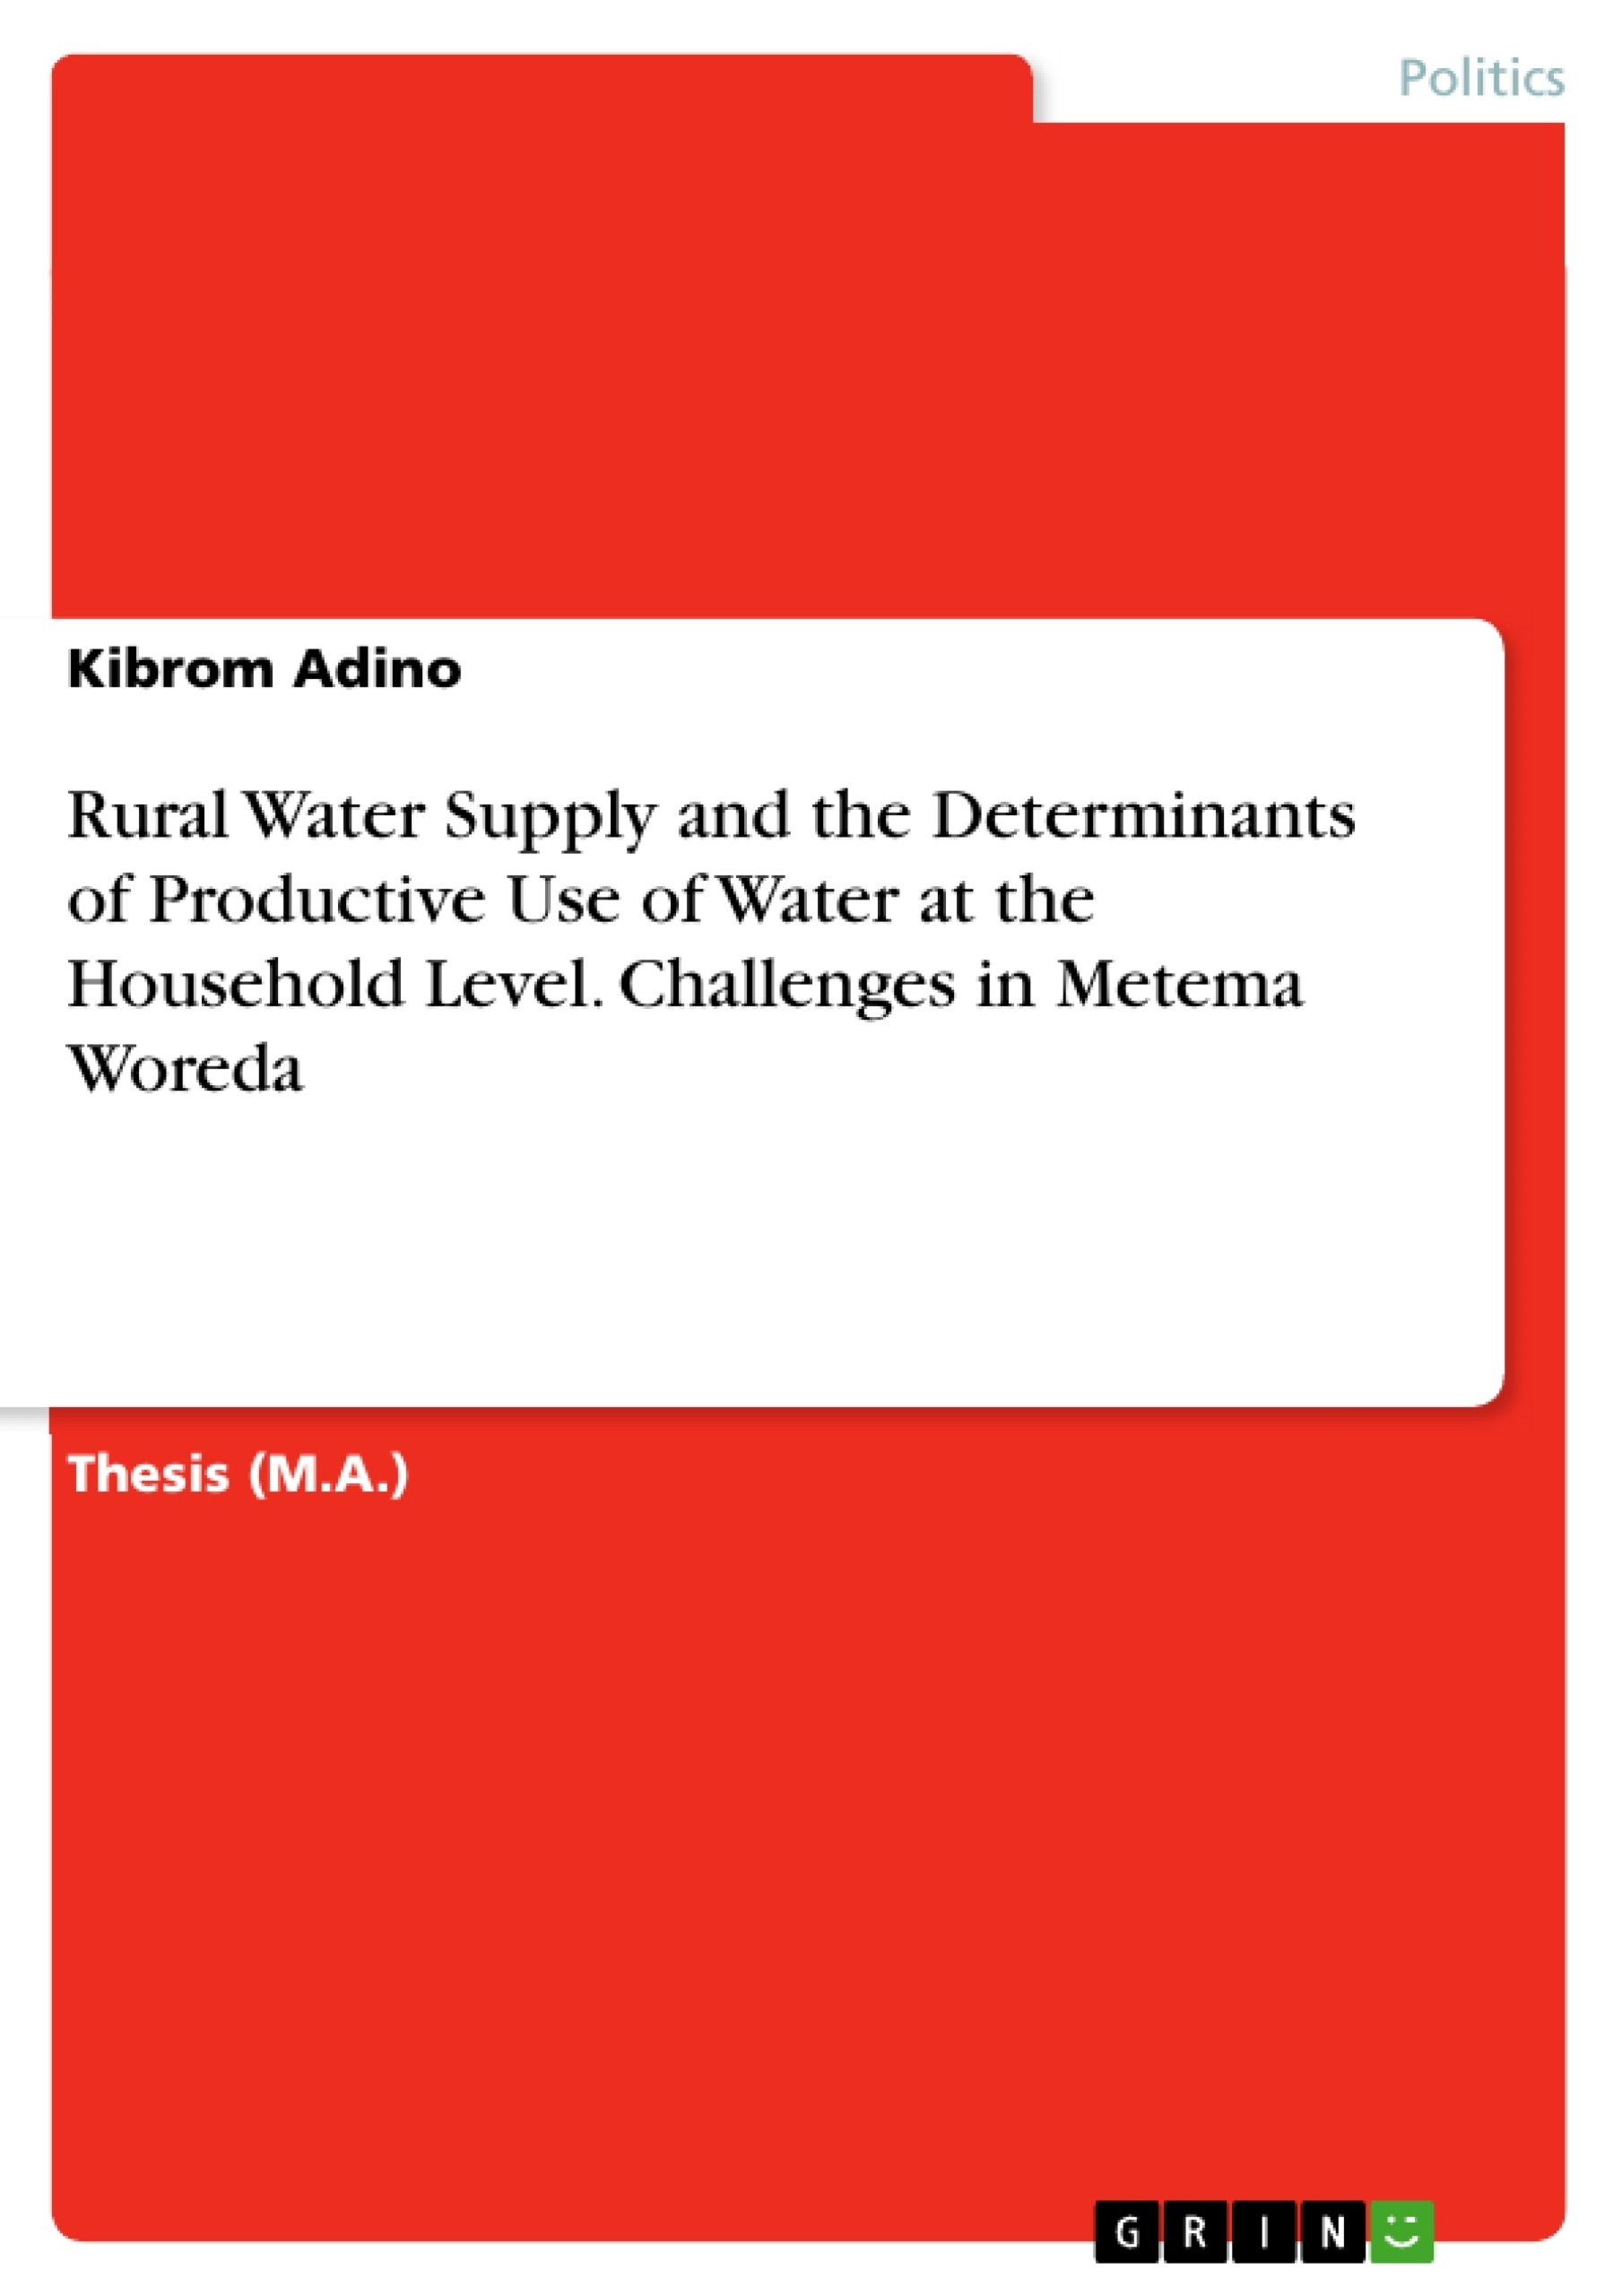 Título: Rural Water Supply and the Determinants of Productive Use of Water at the Household Level. Challenges in Metema Woreda